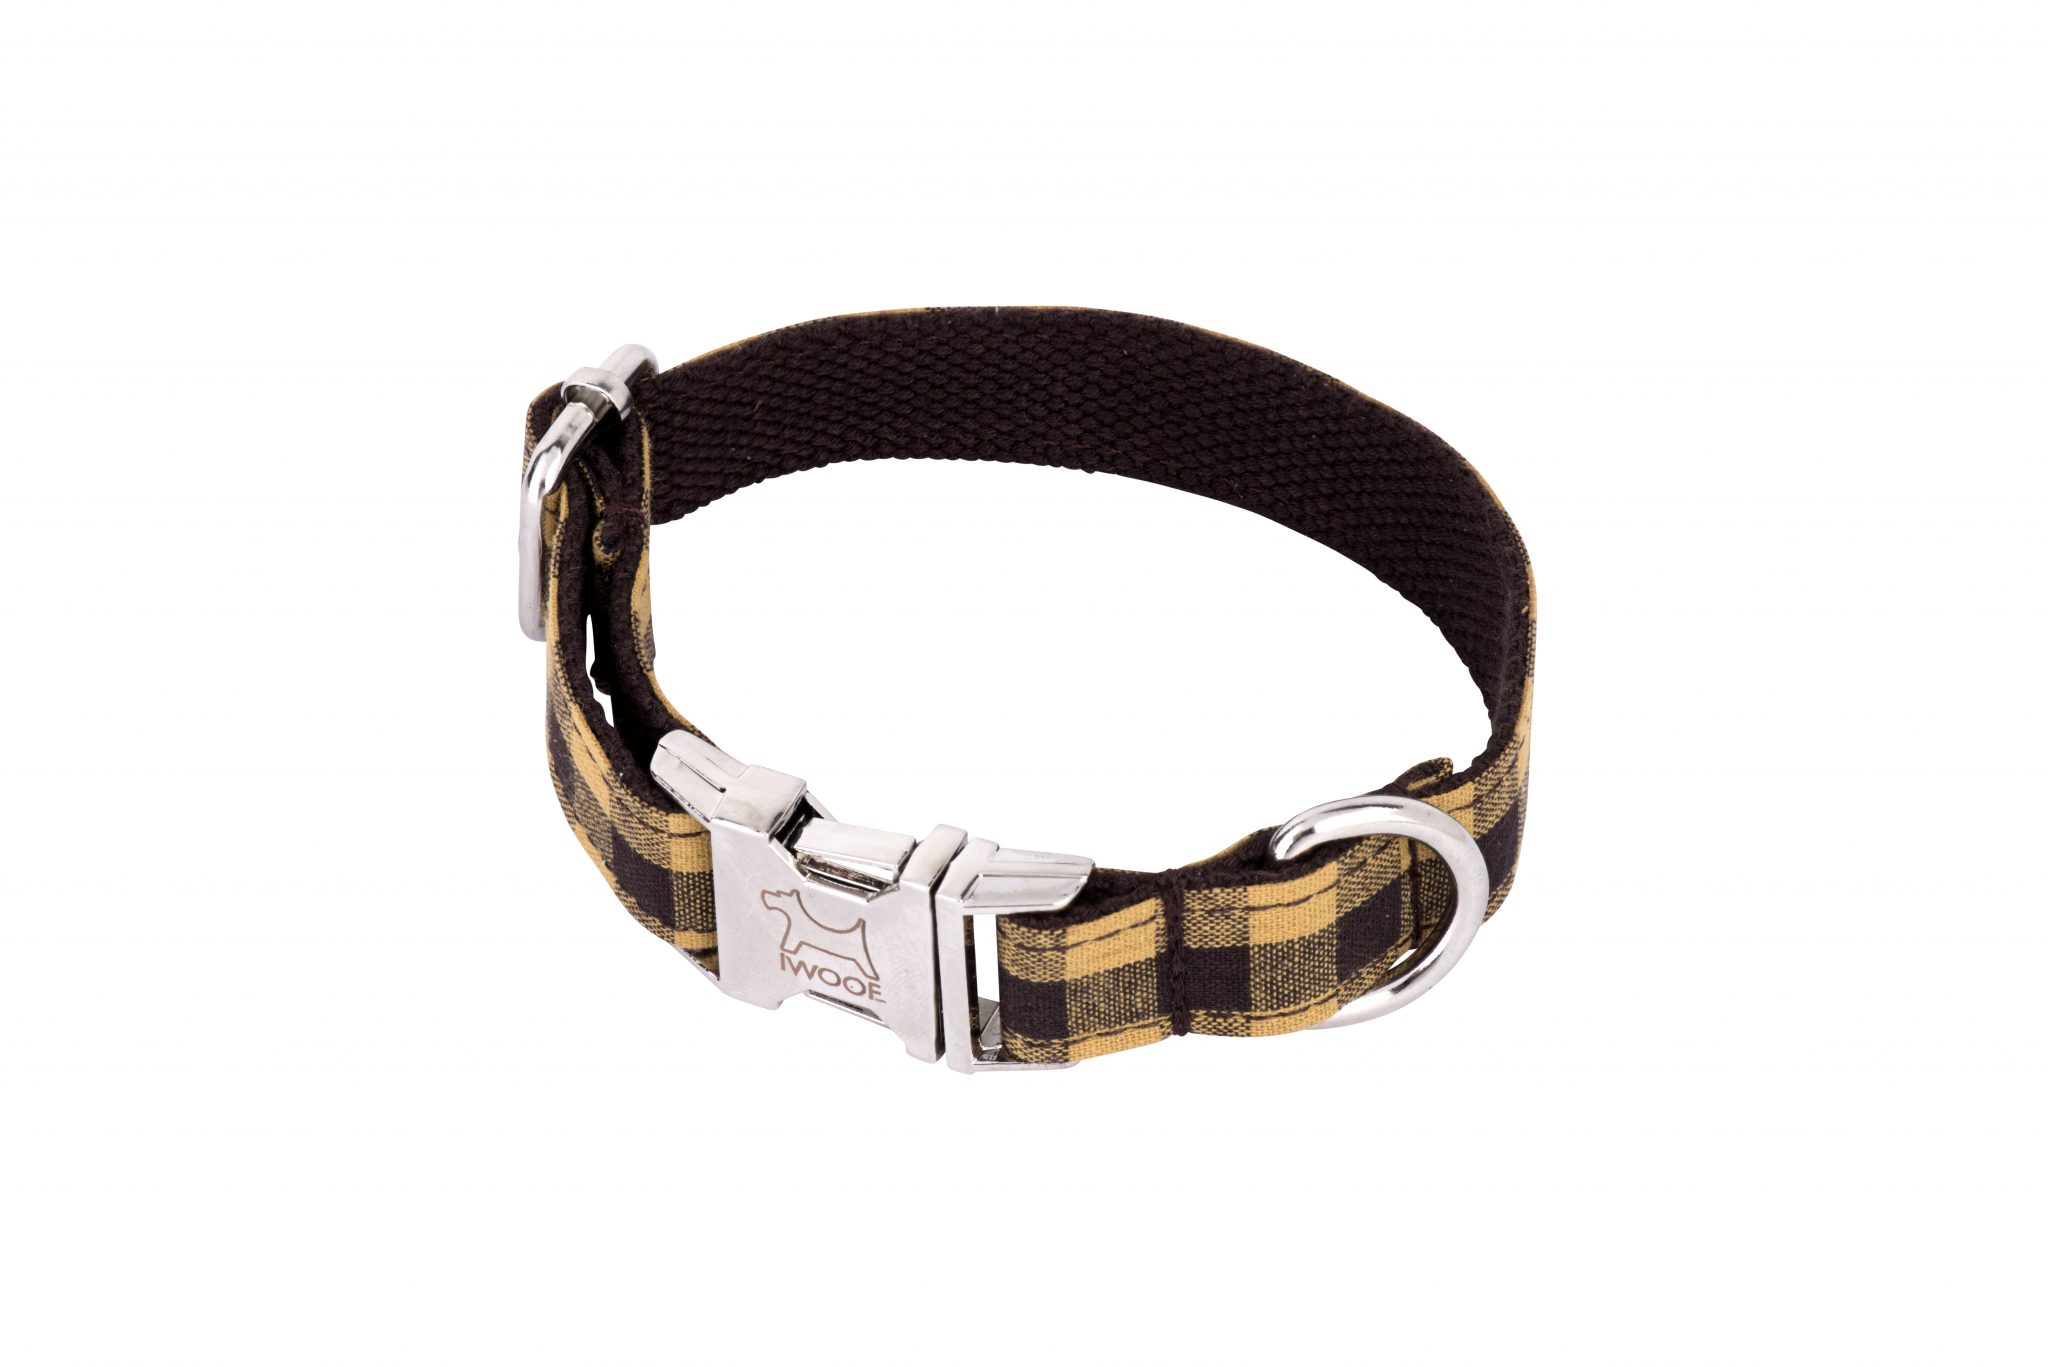 Yellow Check designer dog collar and matching designer dog lead by IWOOF